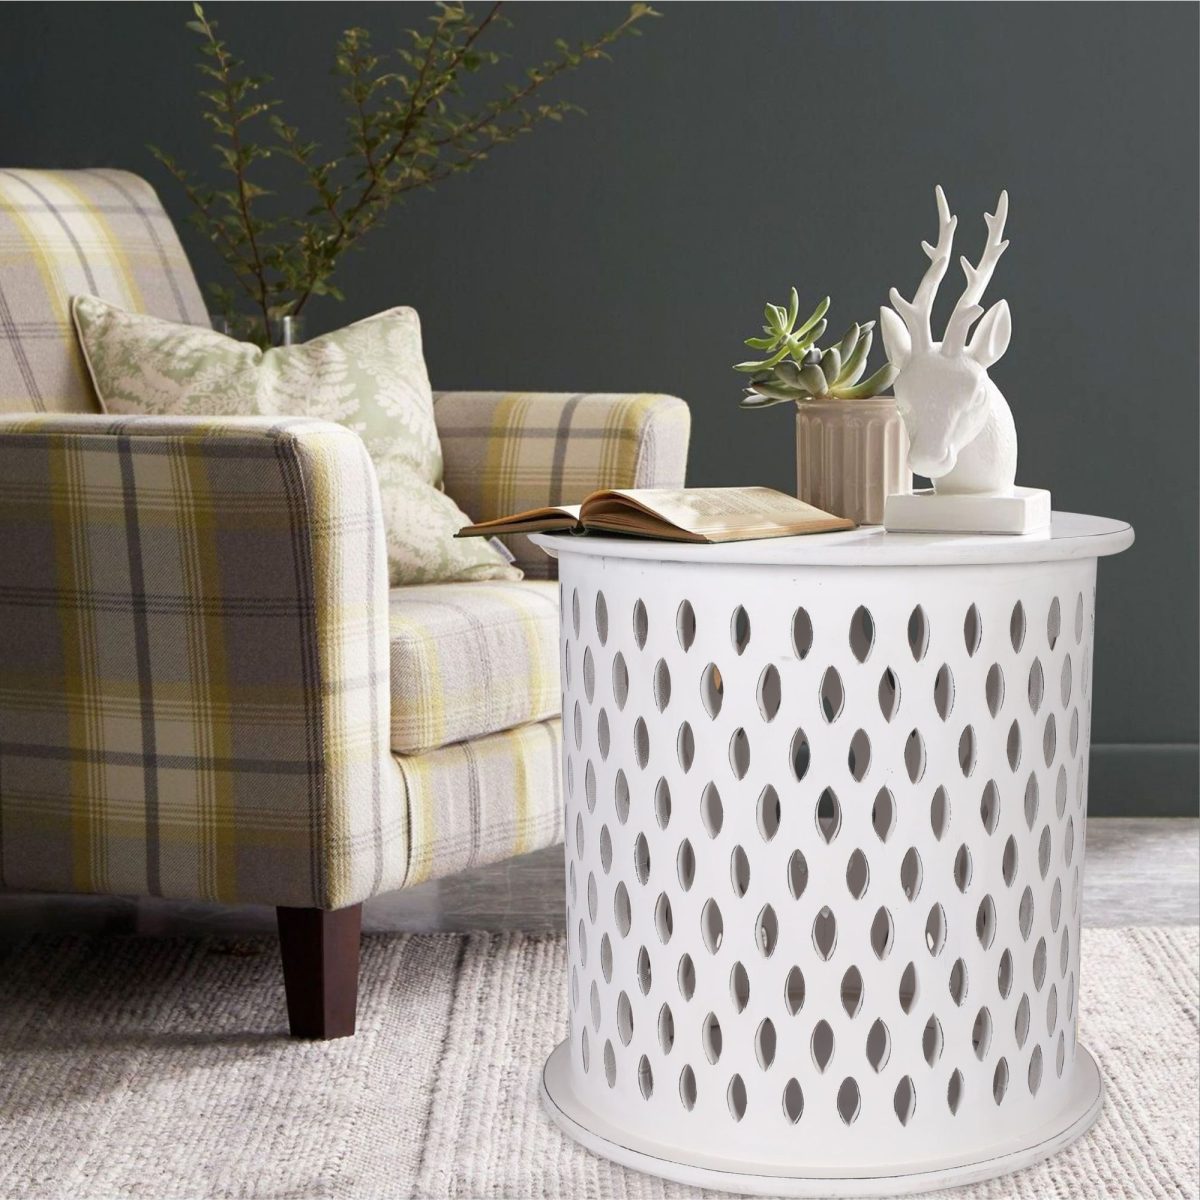 Pansy  Wooden Round Side Table Sofa End Tables – White, 50x50x50 cm